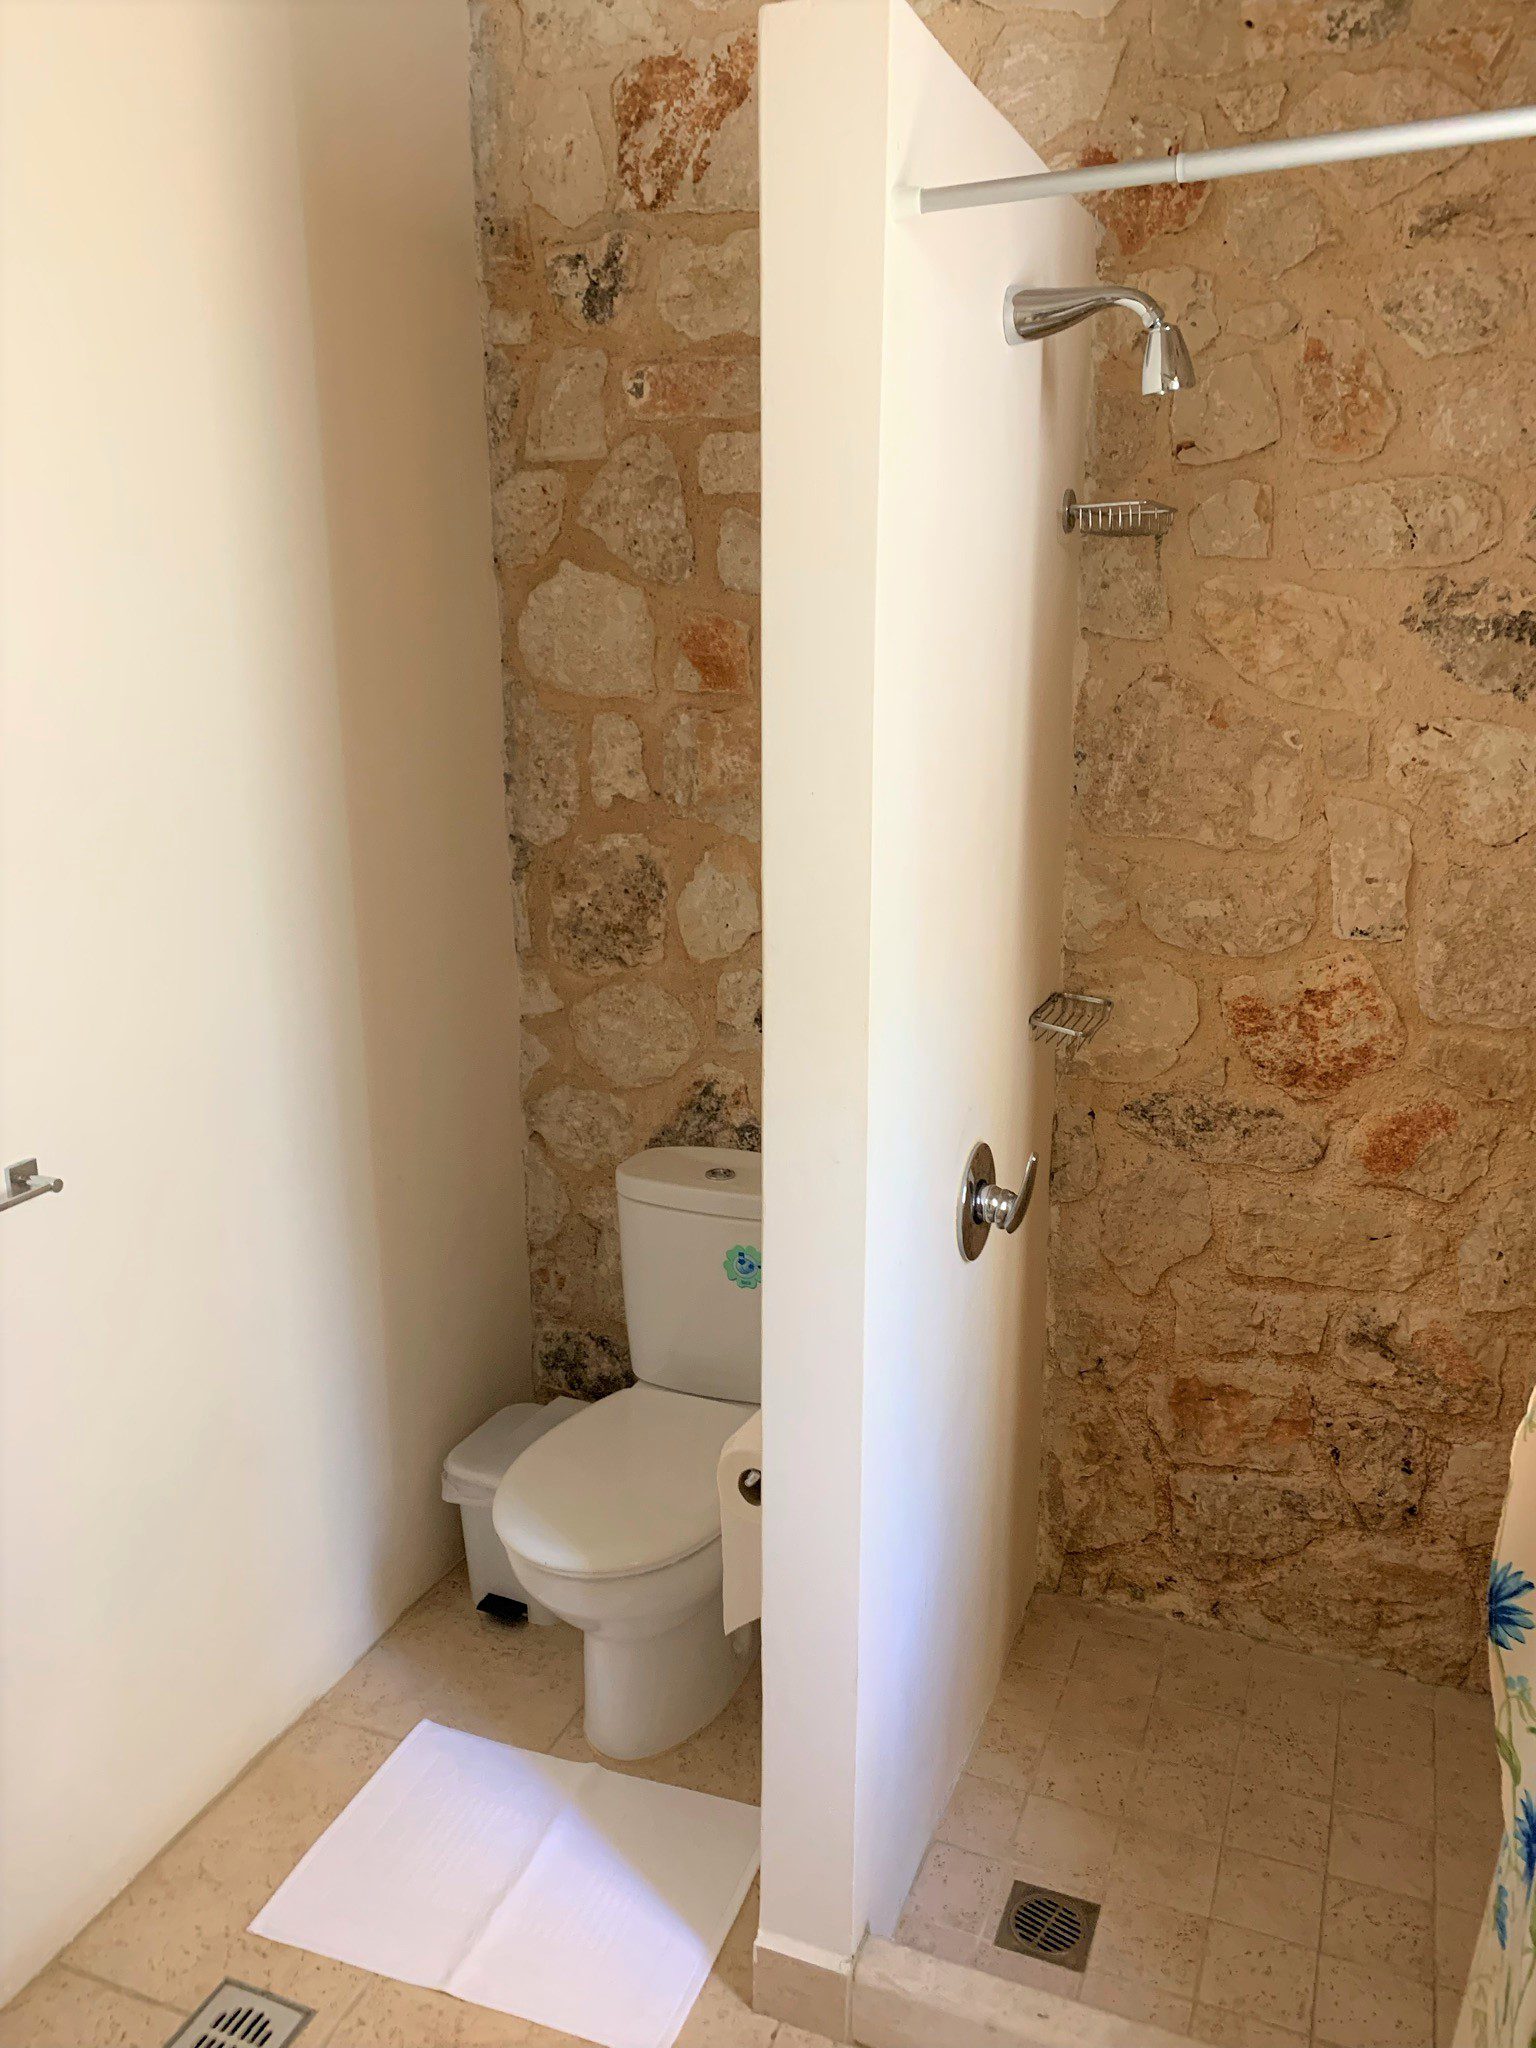 Bathrooom of holiday houses for rent on Ithaca Greece, Stavros